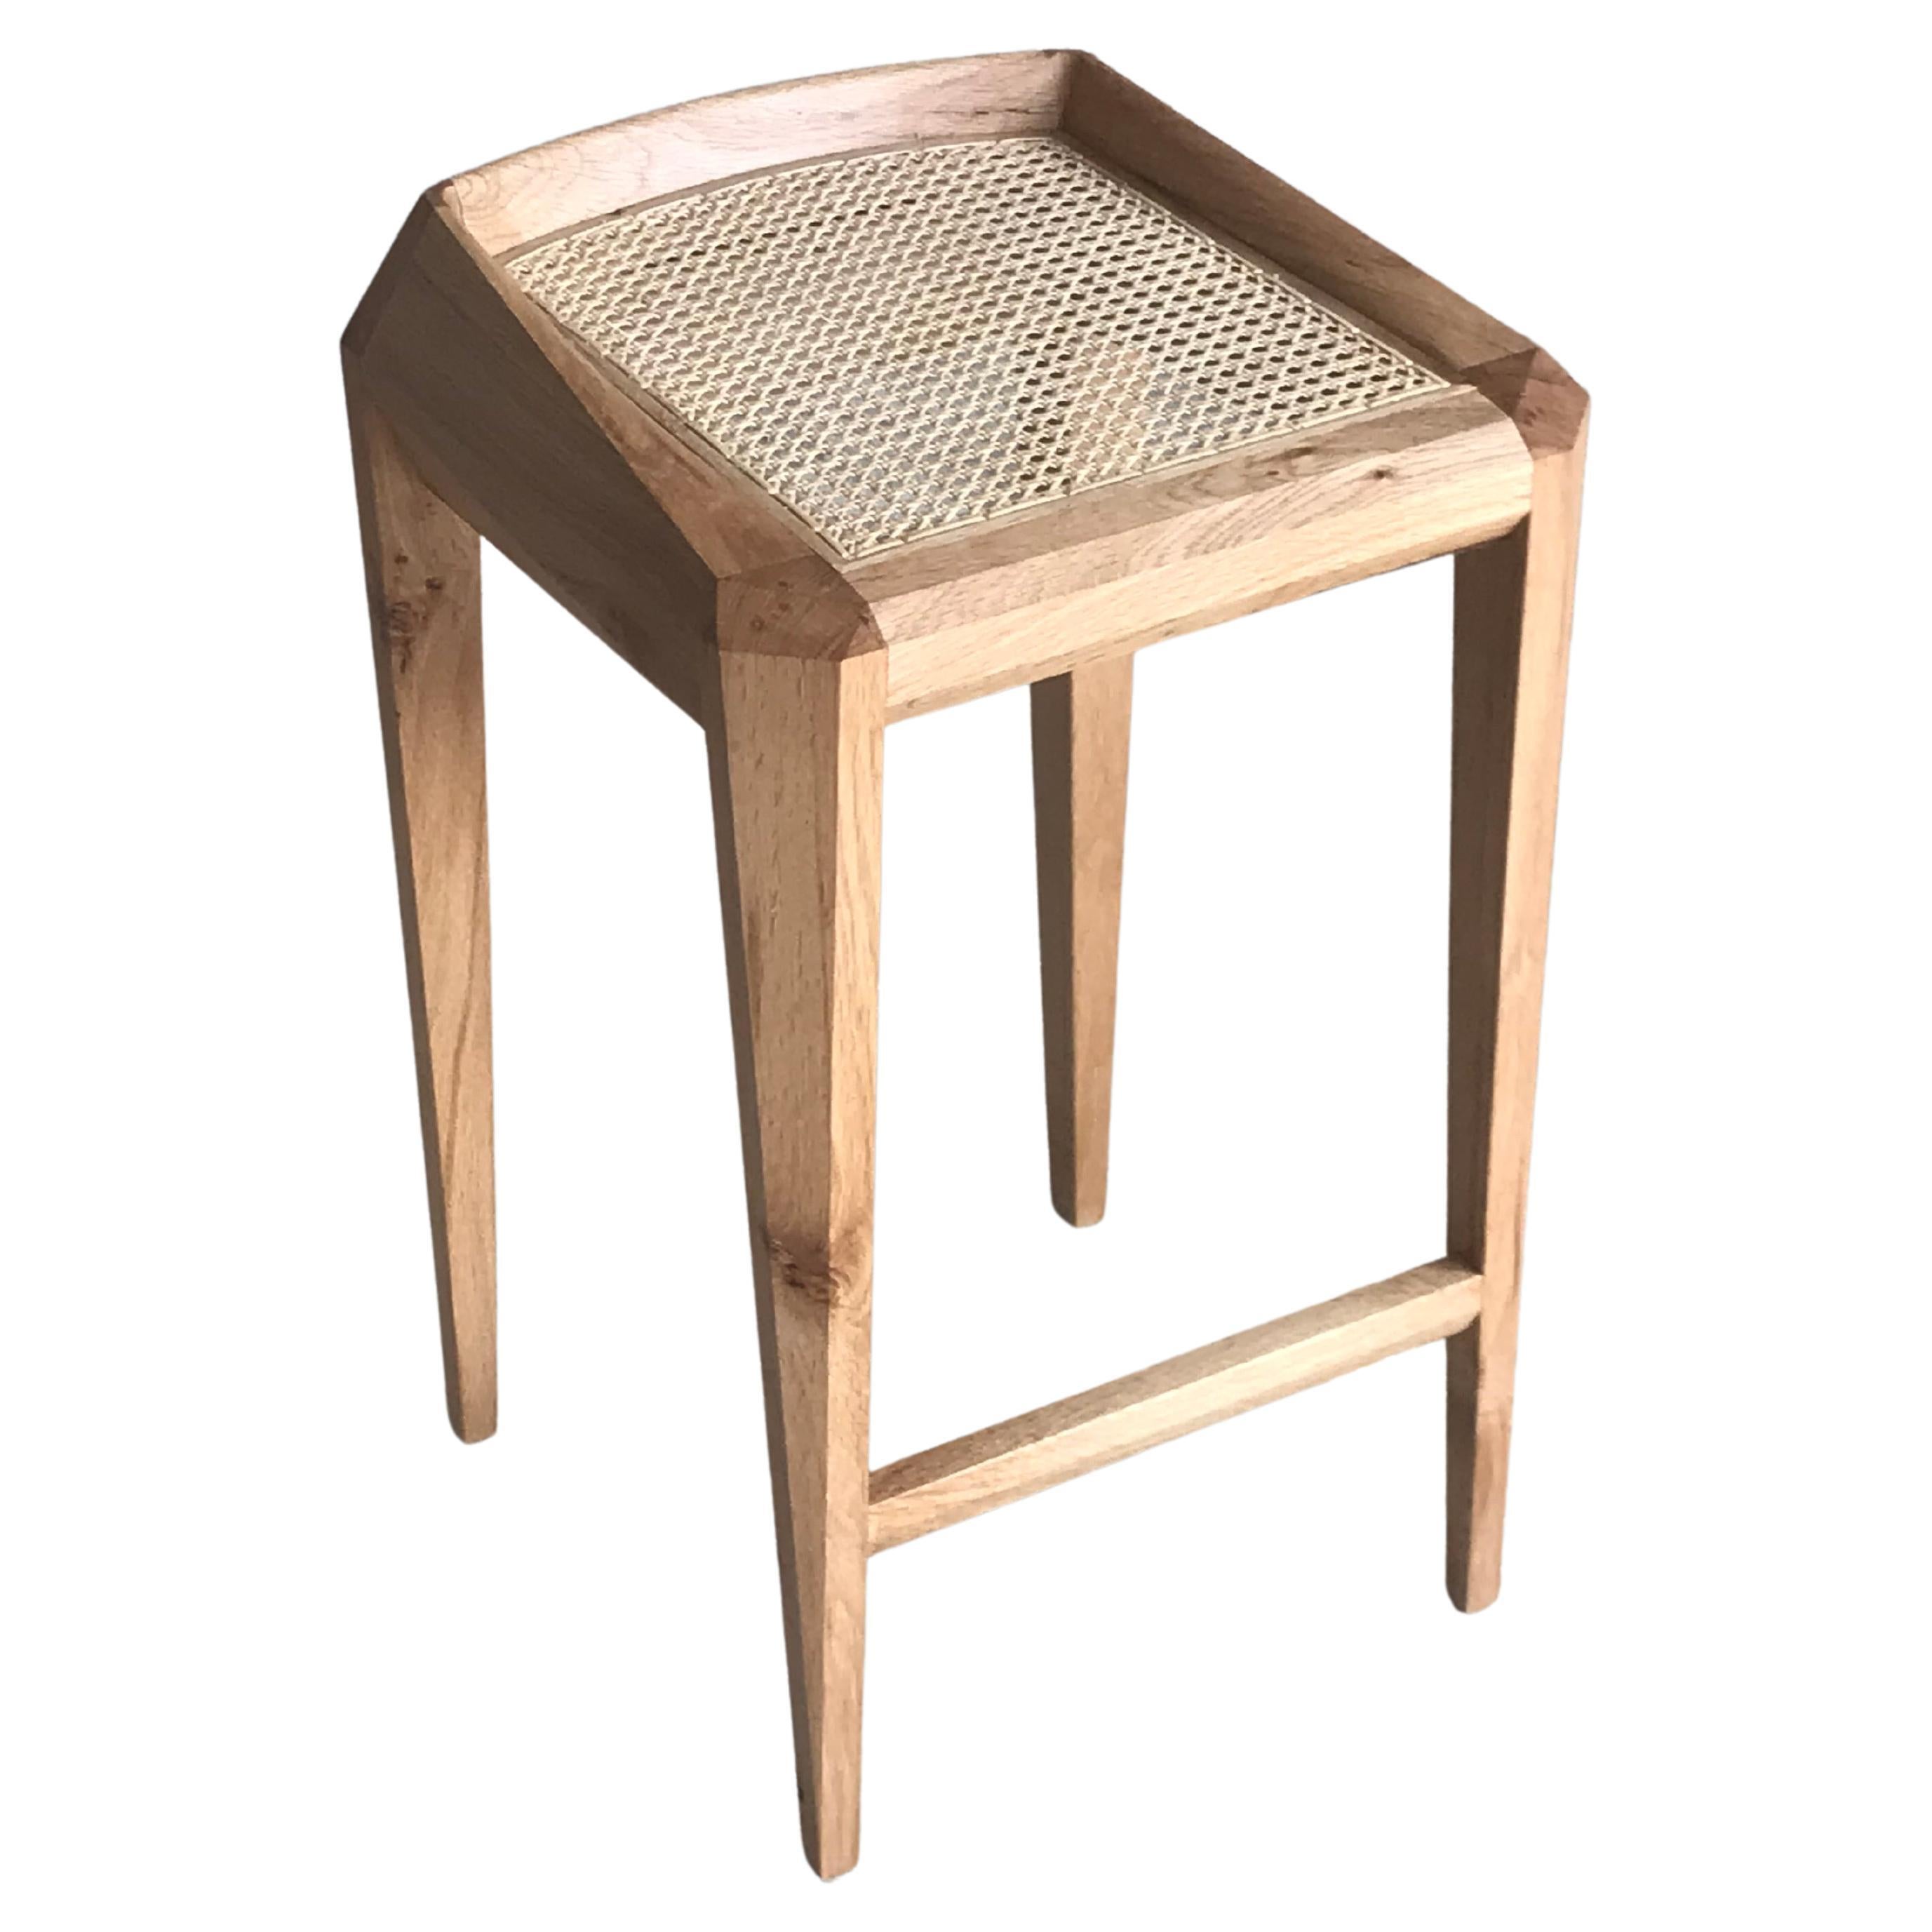 KD Stool a Sculptural Rattan Weaved Top Bar Stool by Tomaz Viana For Sale